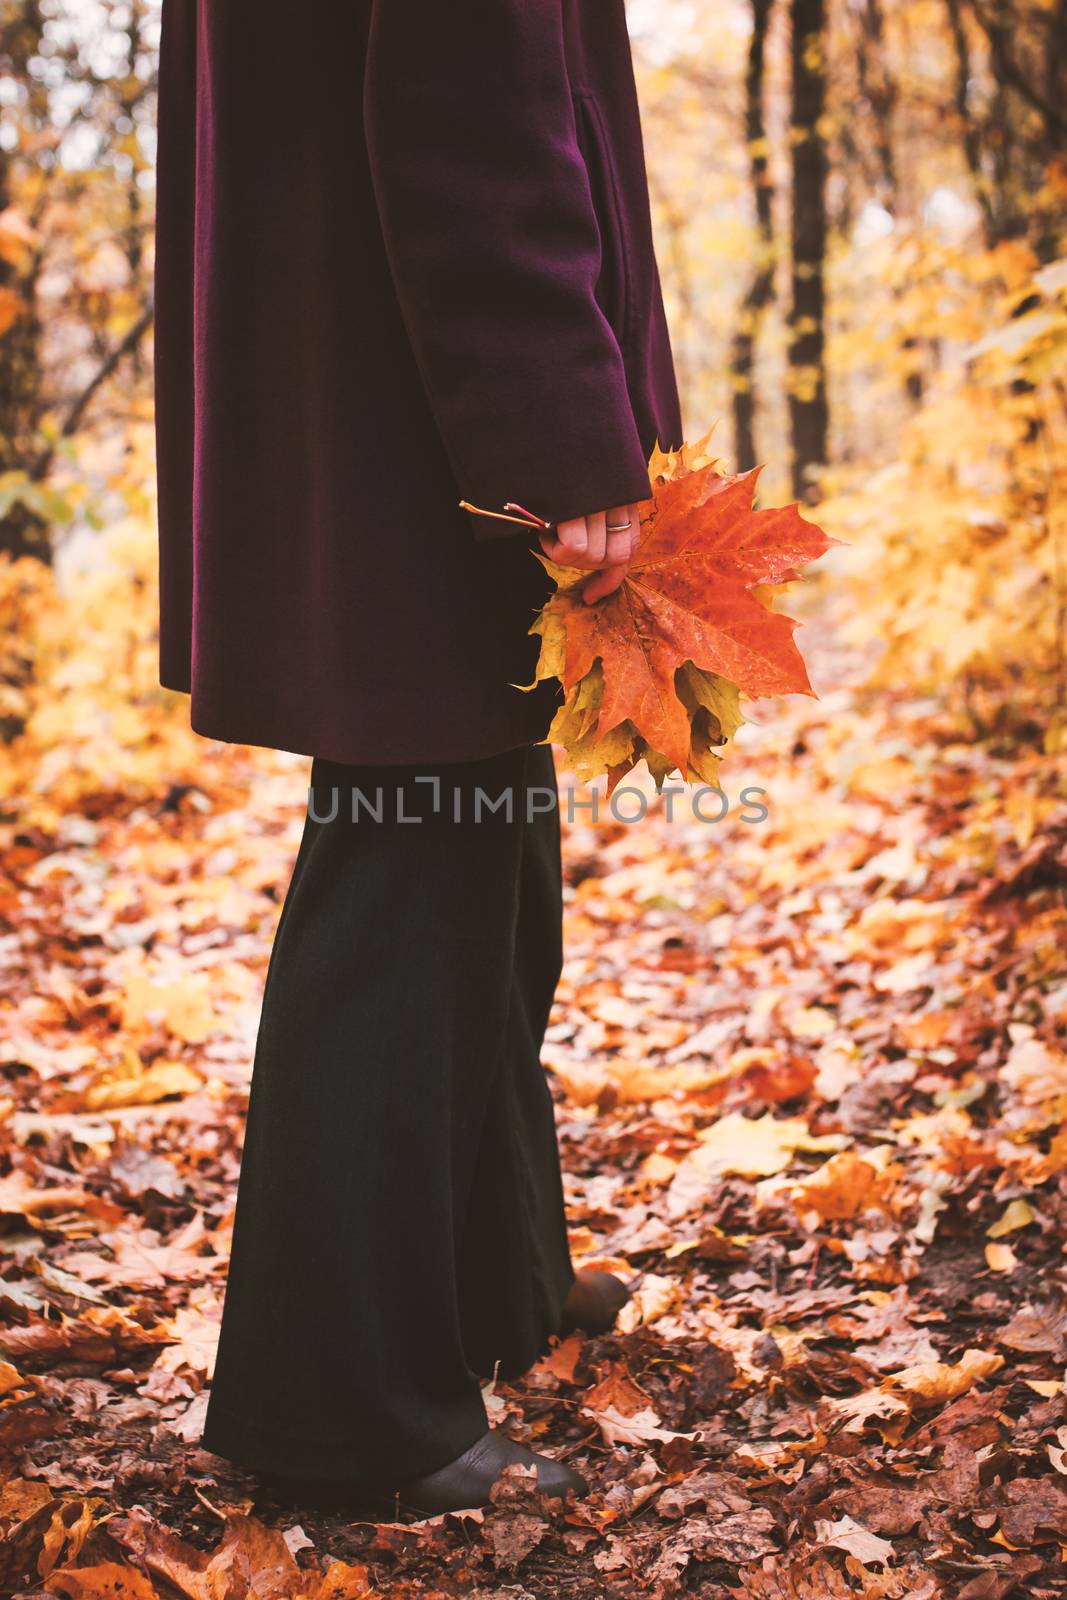 Woman with fallen leaves  vertical